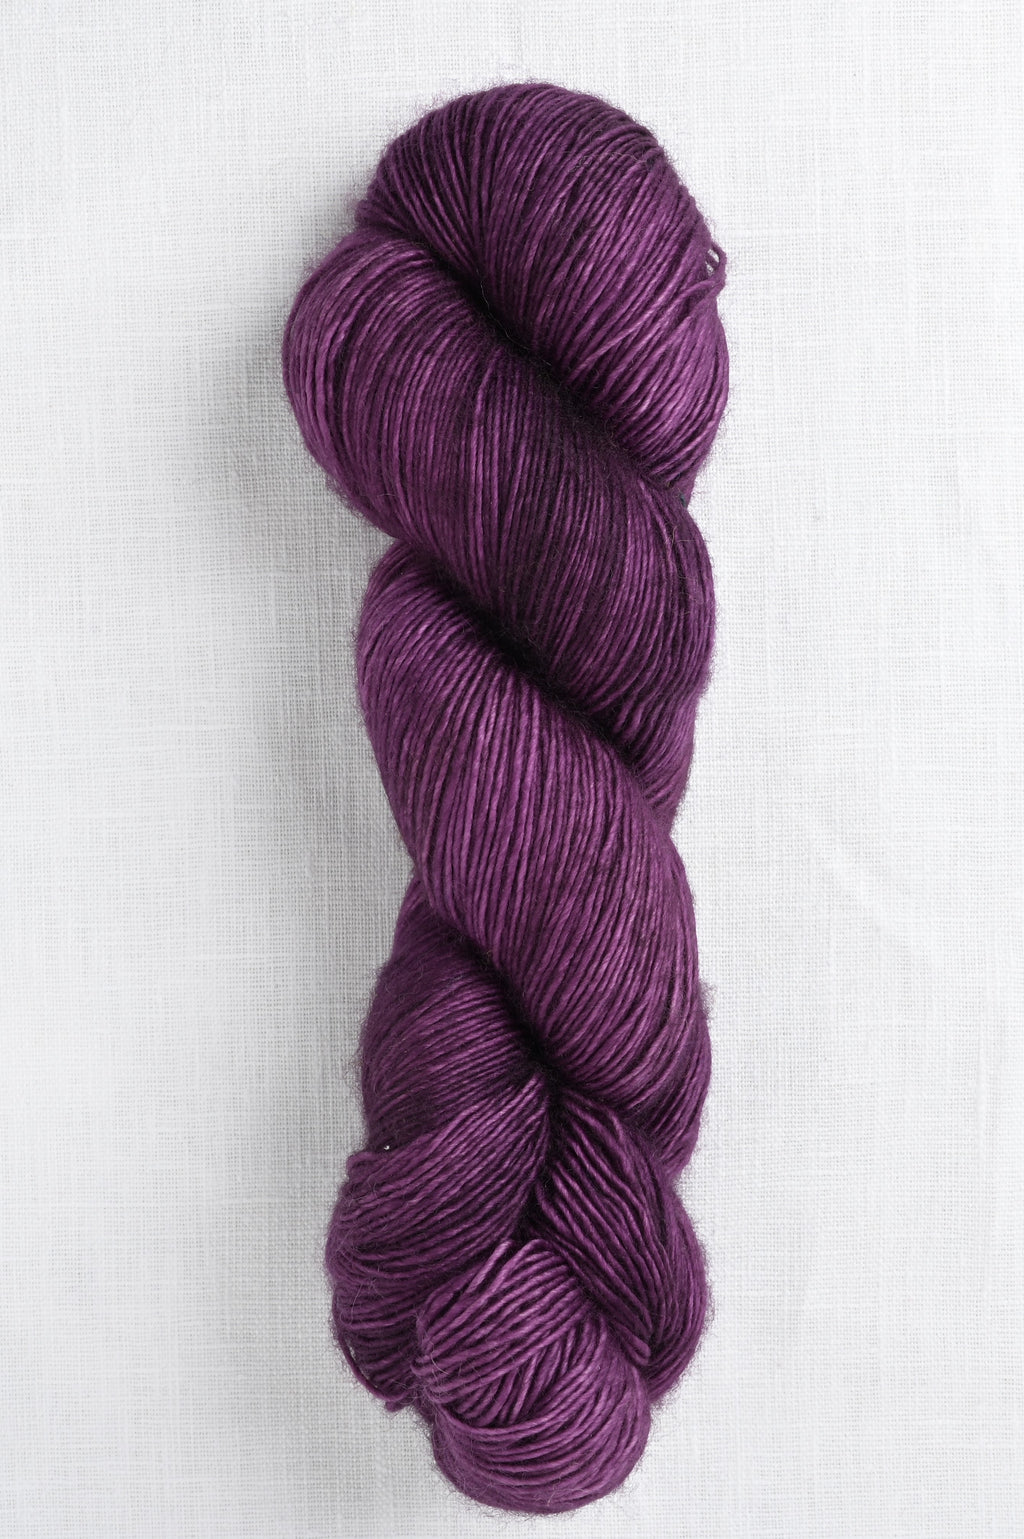 Madelinetosh ASAP Medieval (Core)